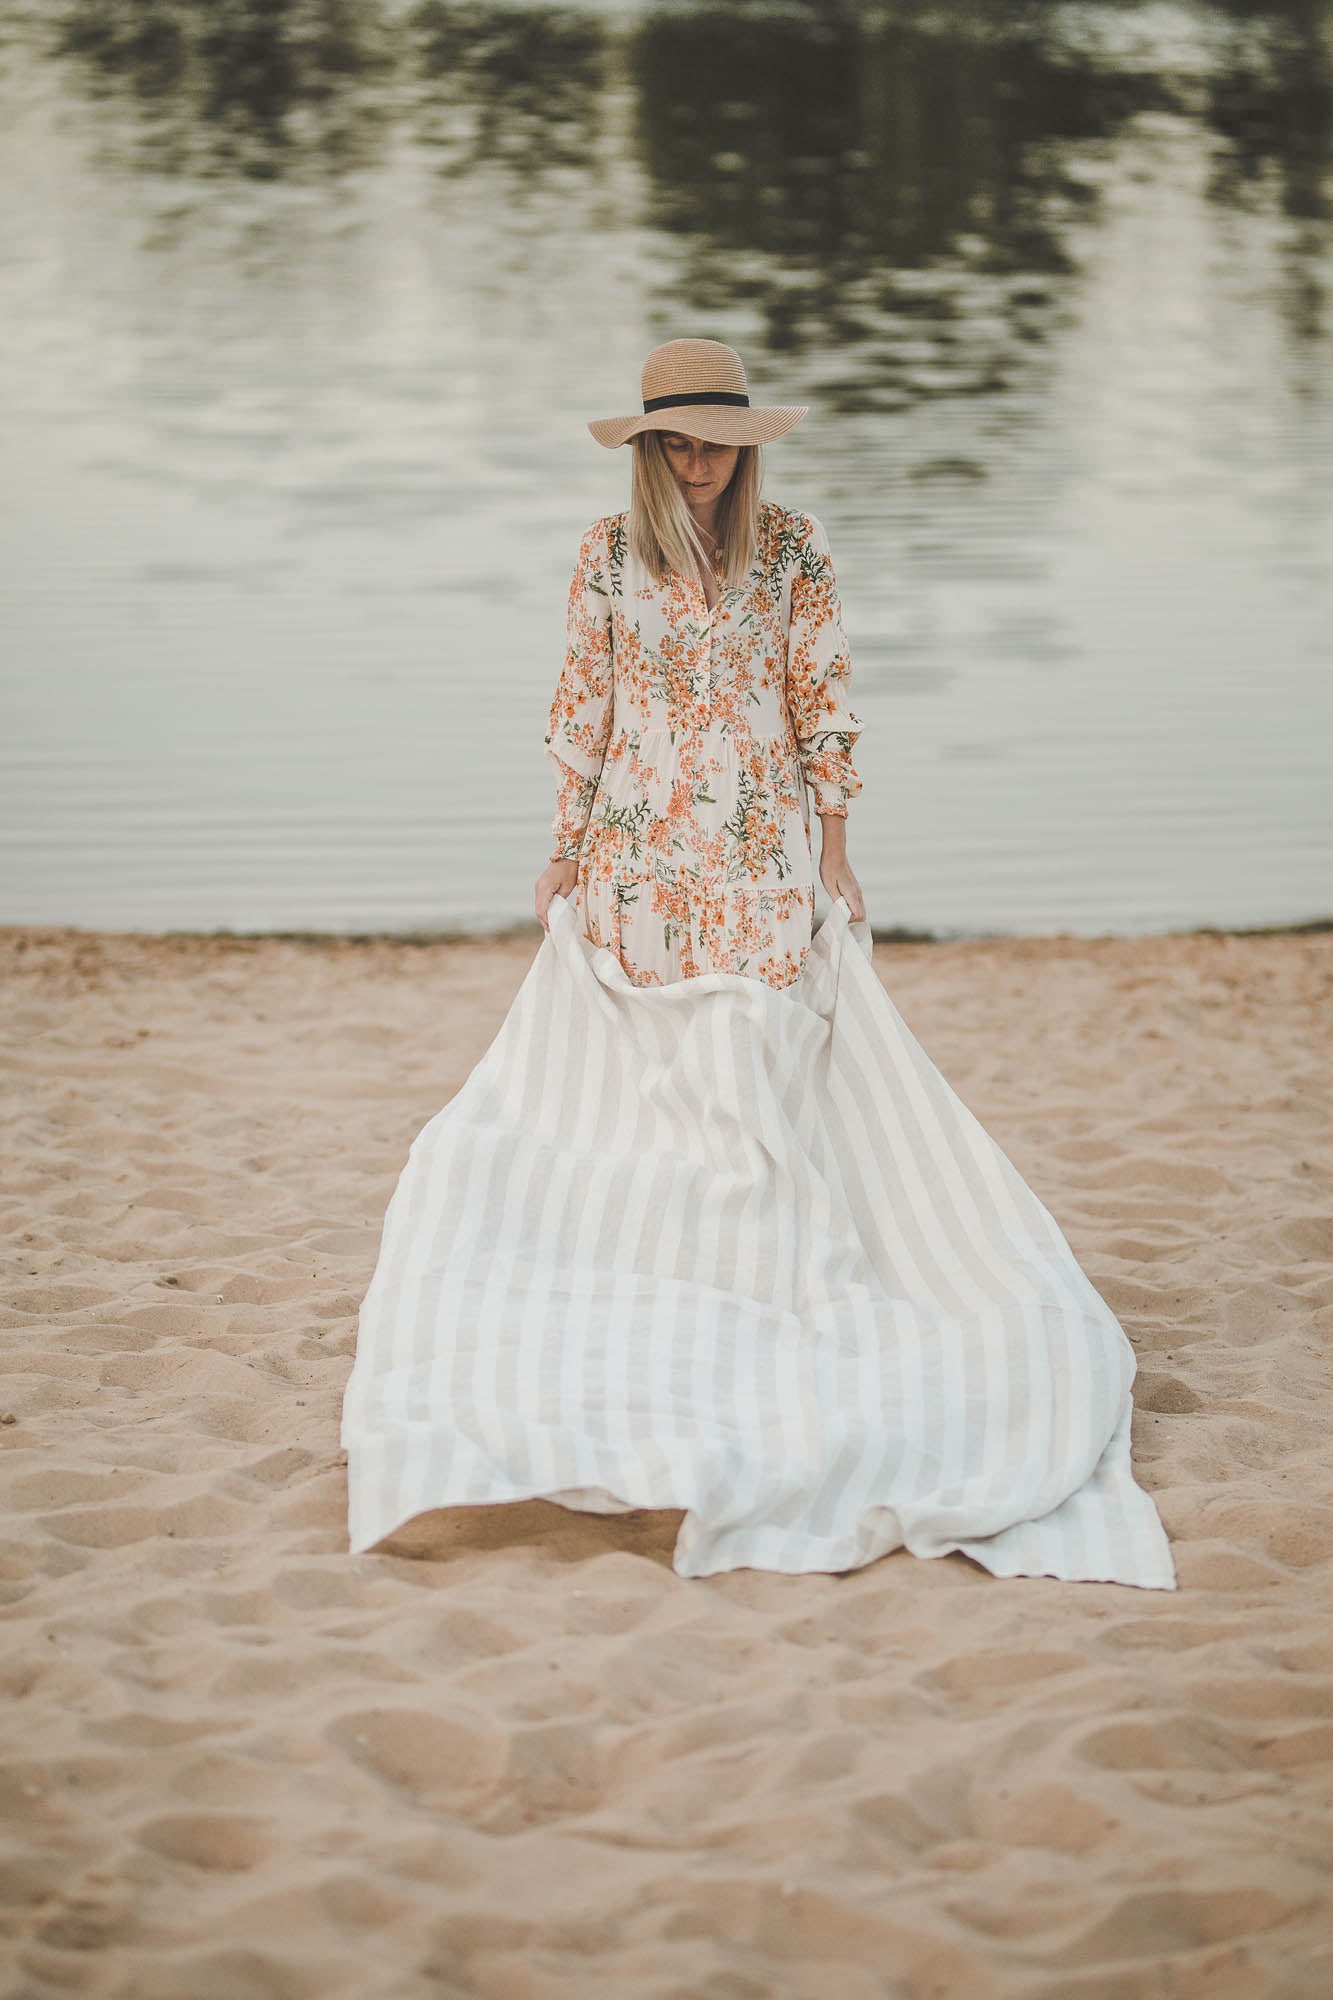 Linen beach blanket with white/natural stripes